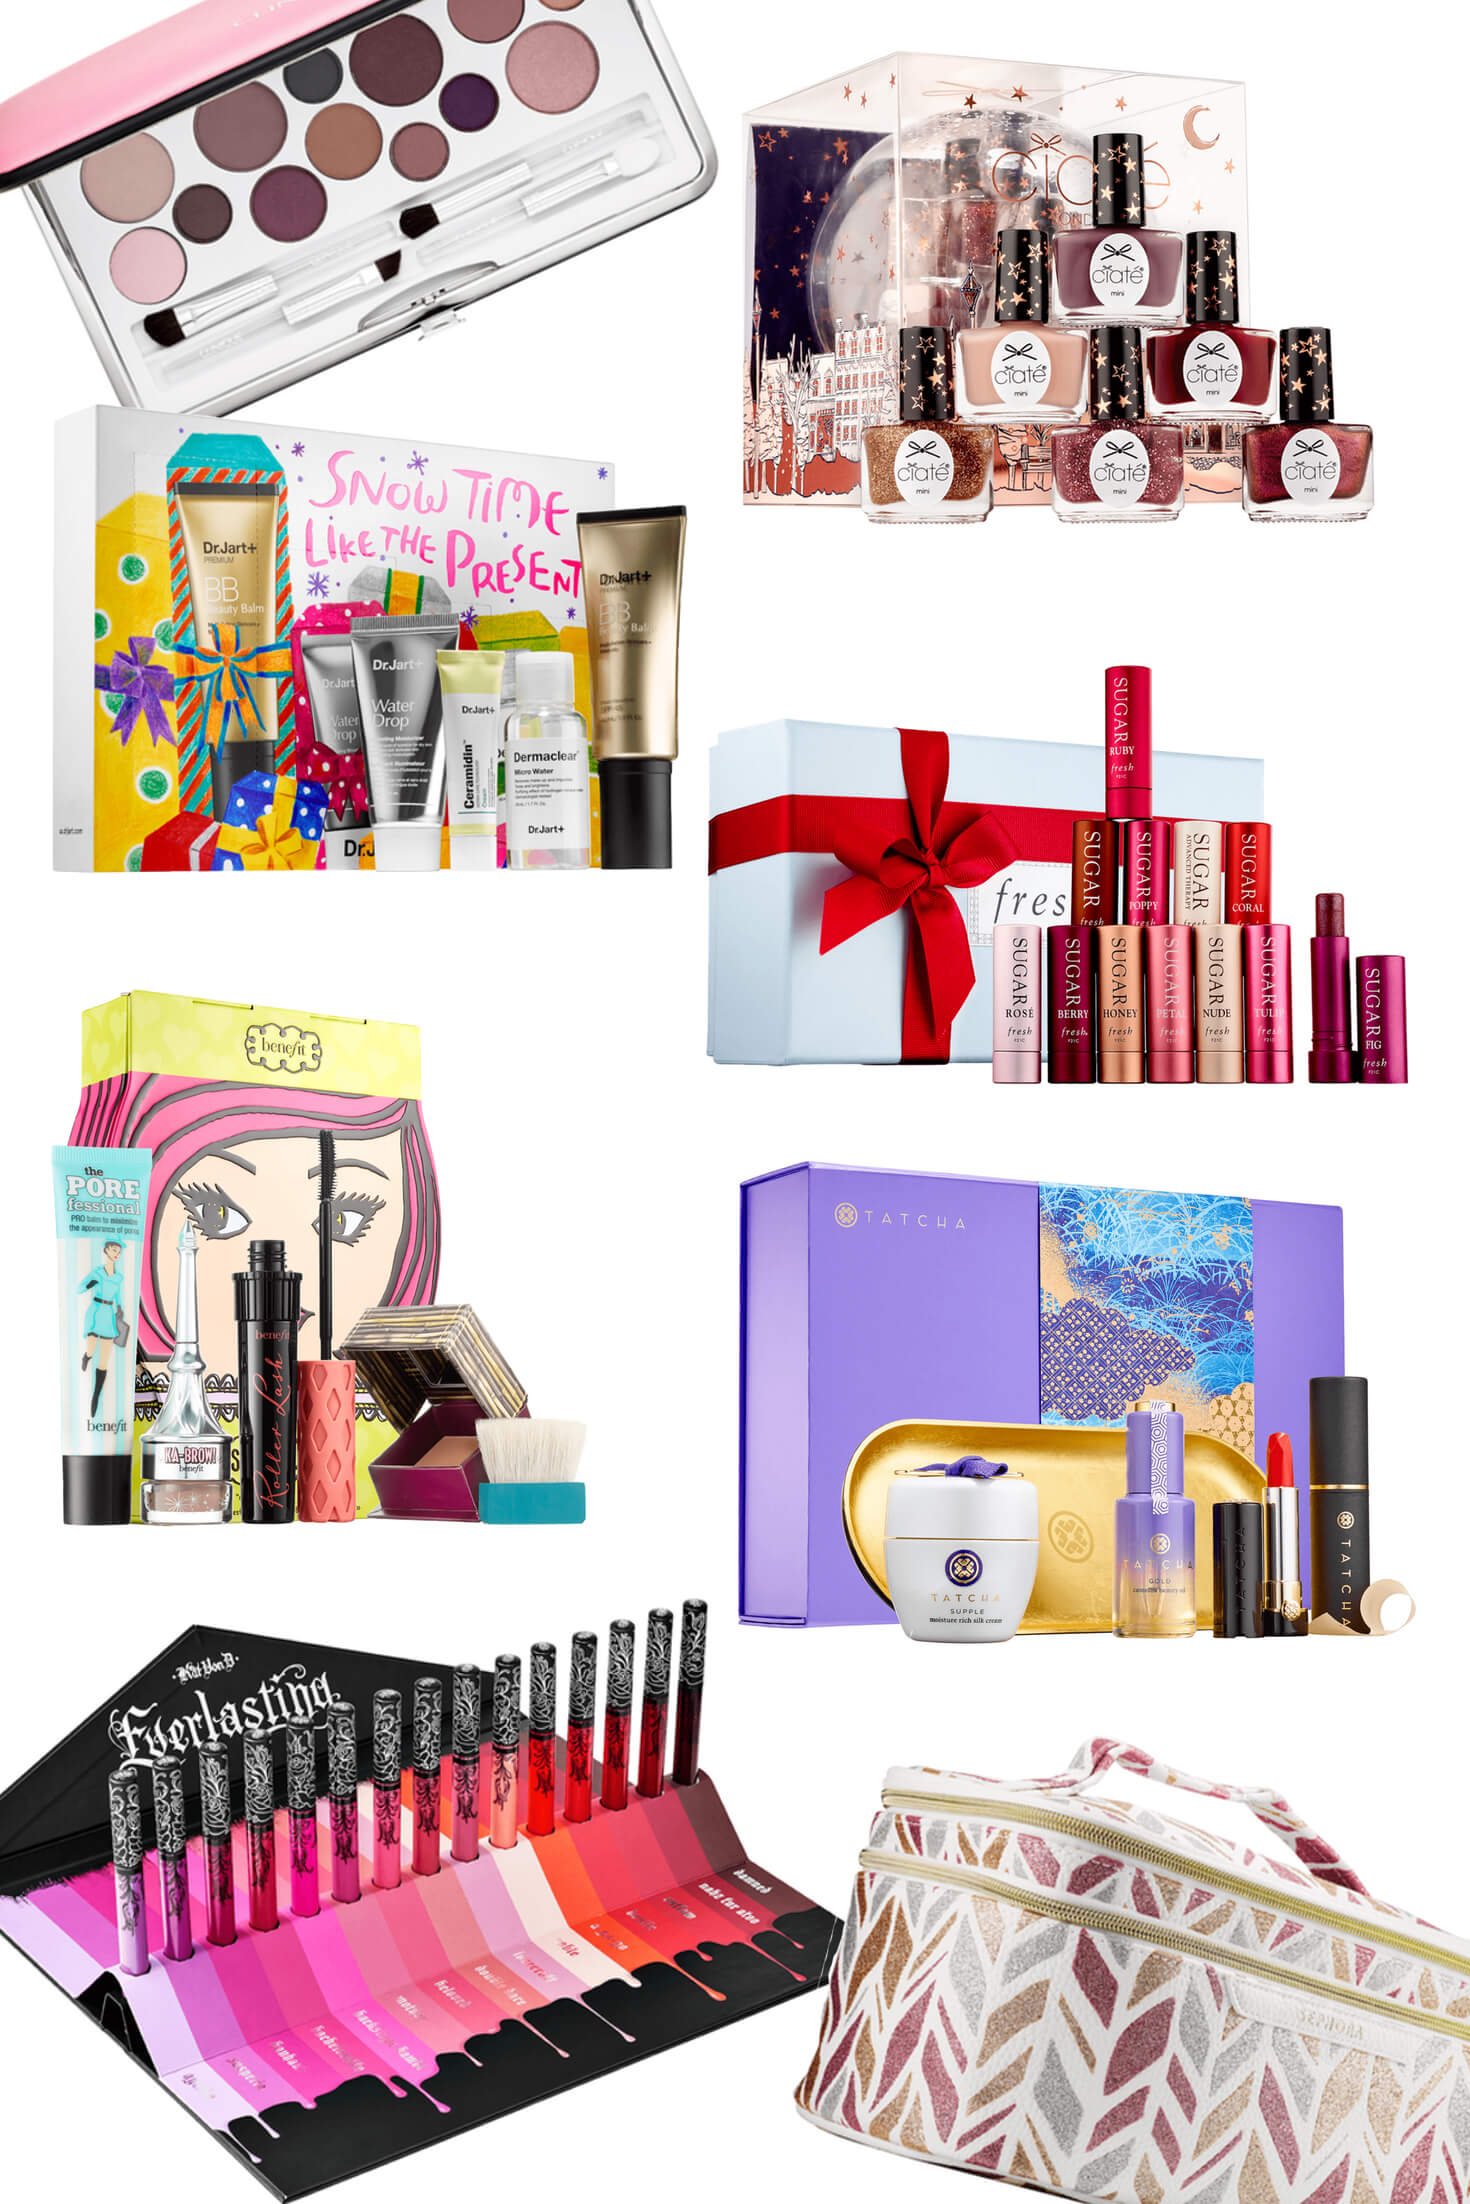 Sephora Holiday Gift Guide The Best Gift Sets, Holiday Specials, and